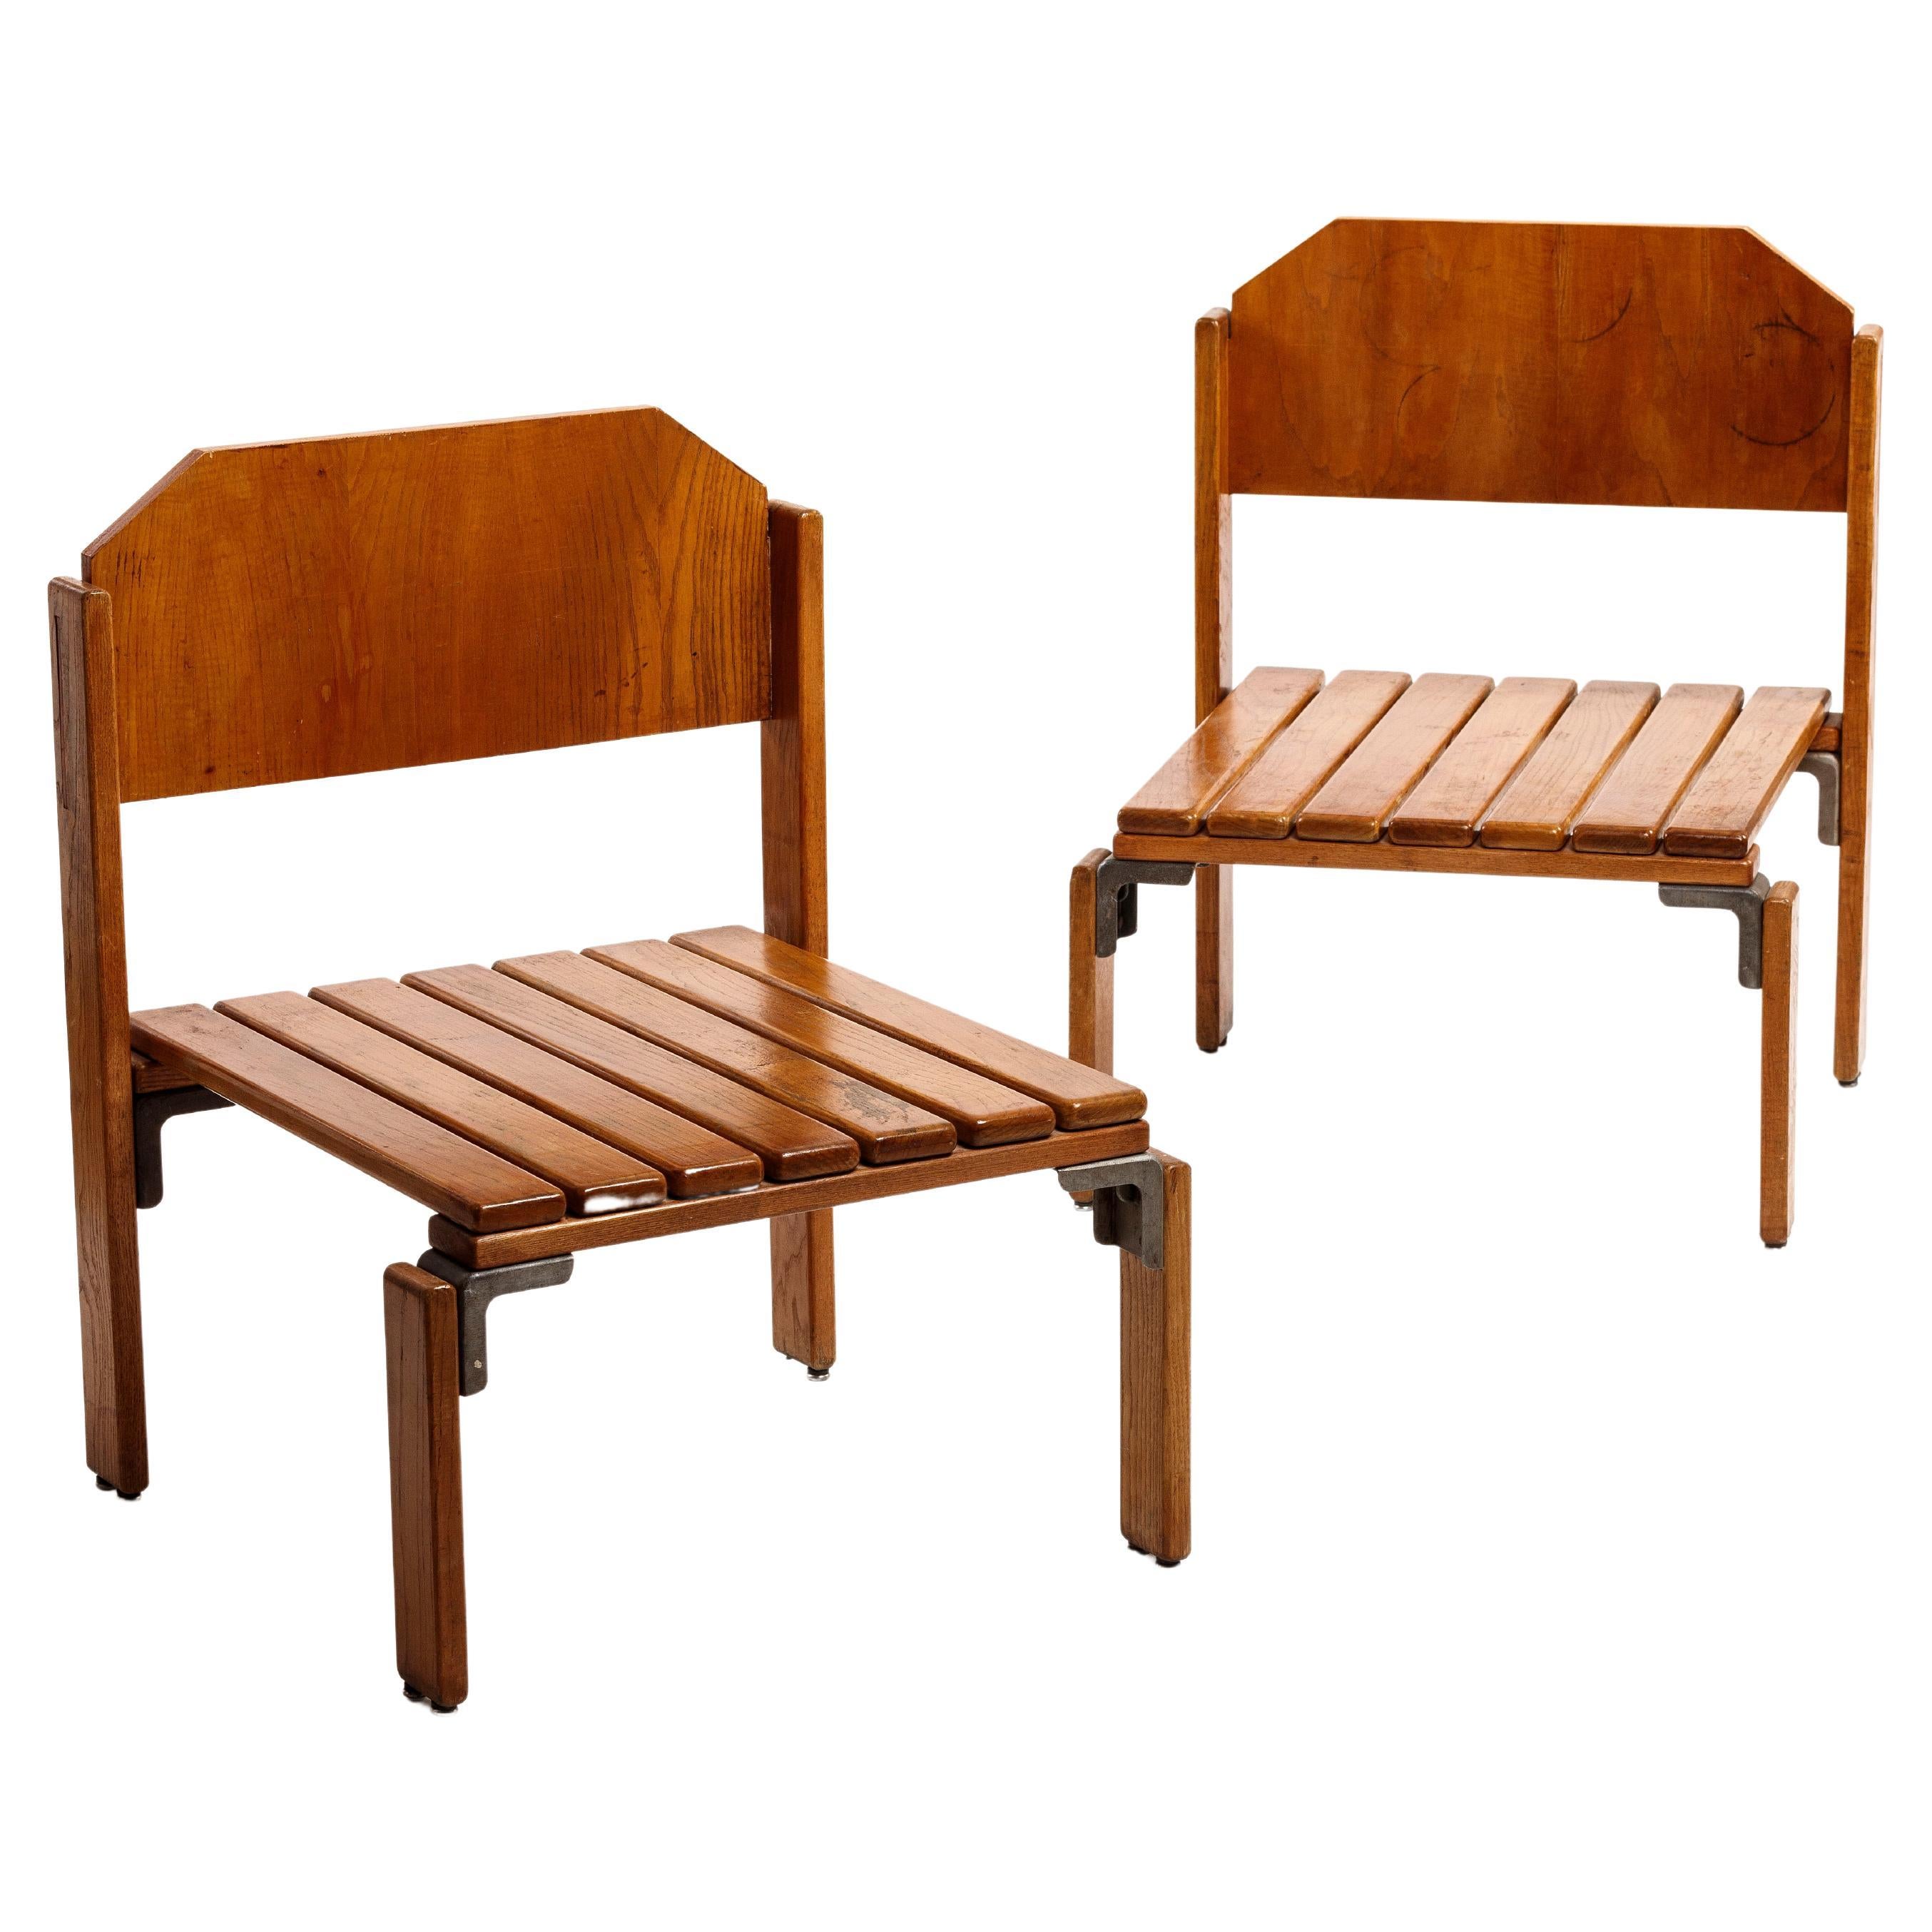 Rare and iconic large low chairs by Georges Candilis and Anja Blomstedt For Sale